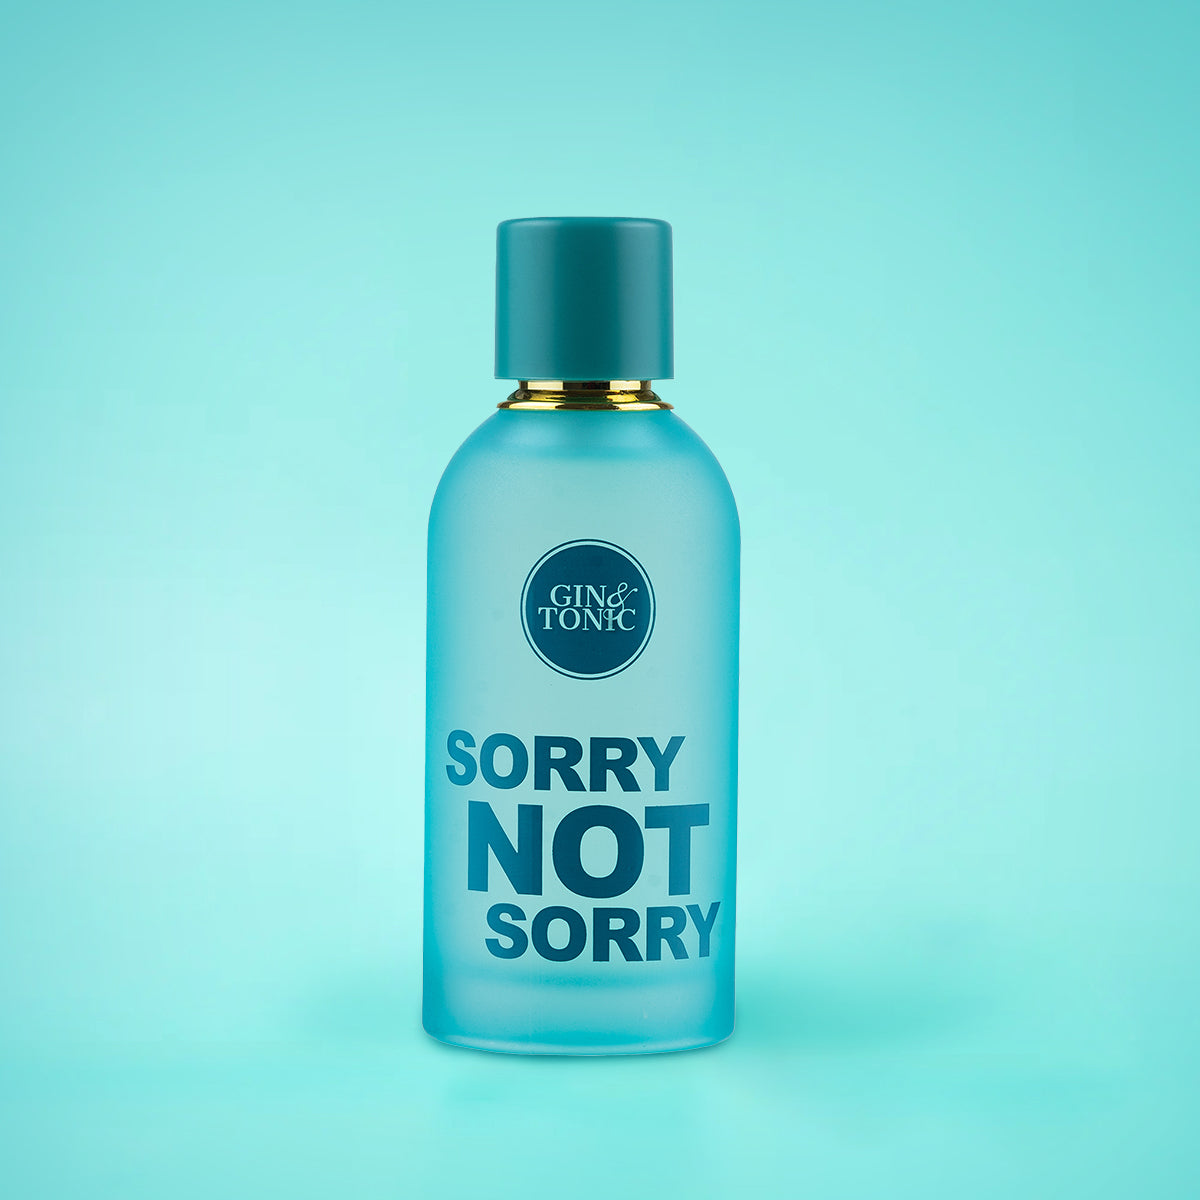 Gin & Tonic Sorry Not Sorry Perfume for Women 100ml - cred